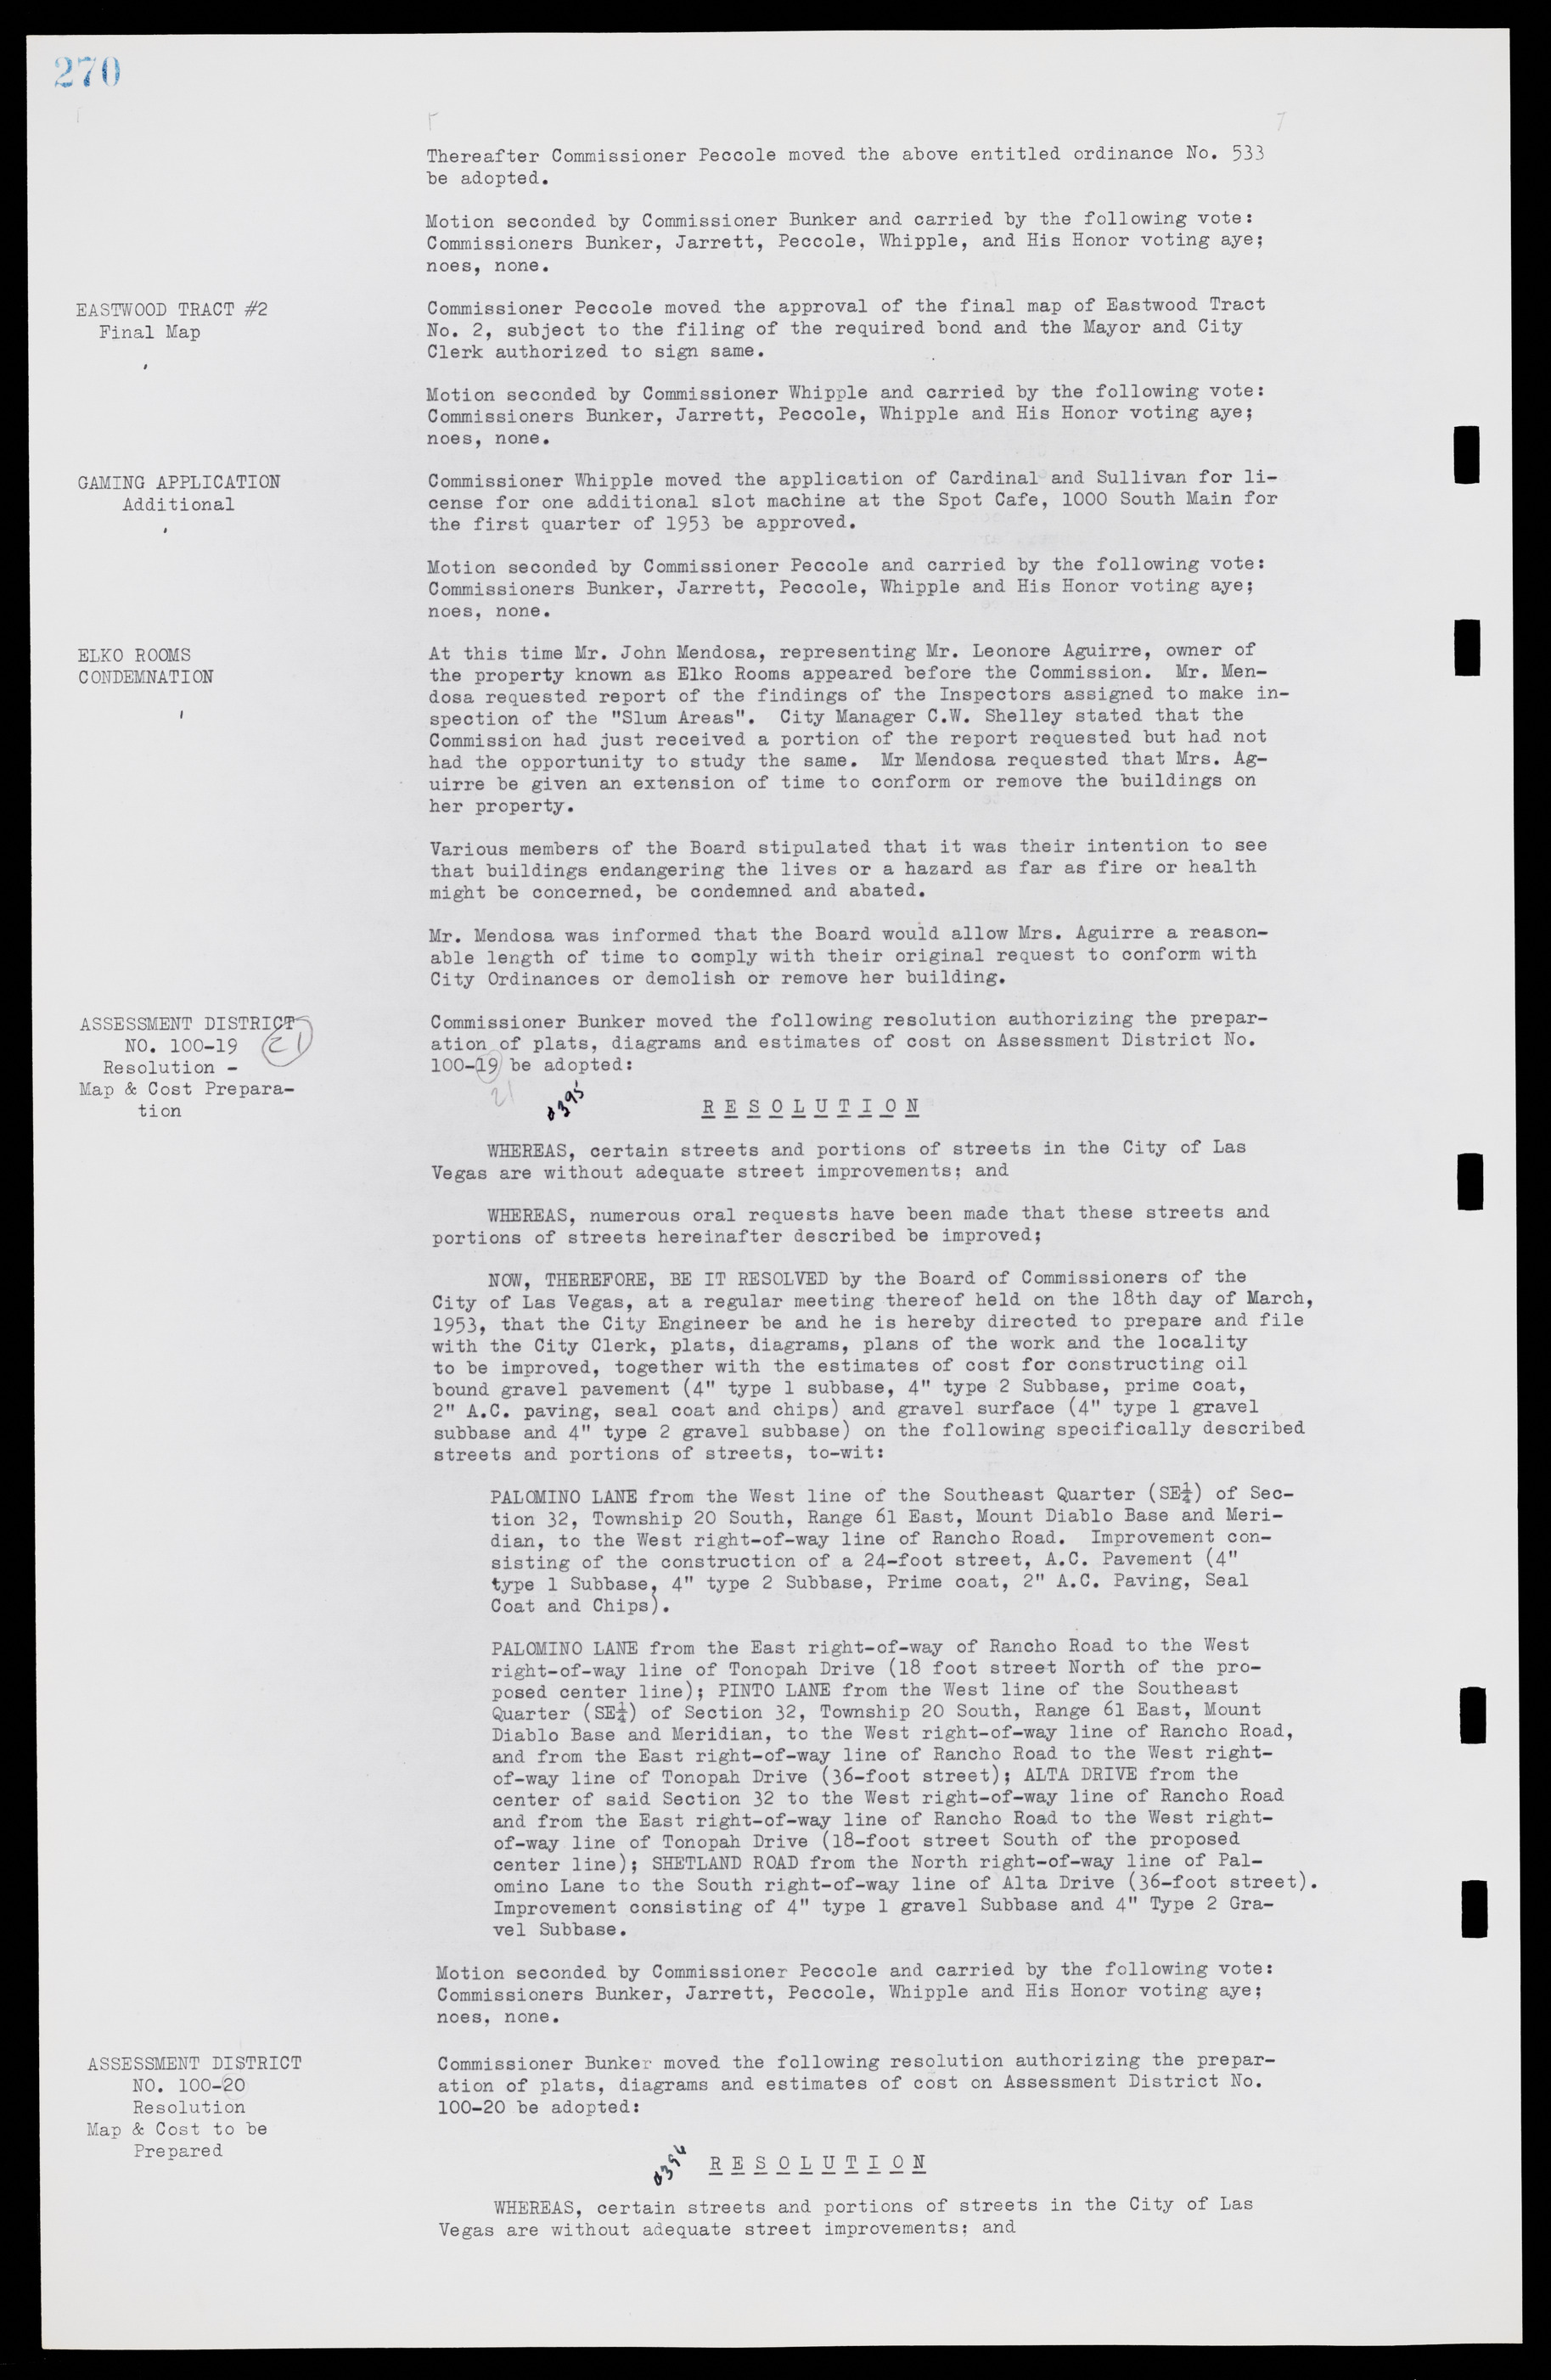 Las Vegas City Commission Minutes, May 26, 1952 to February 17, 1954, lvc000008-286